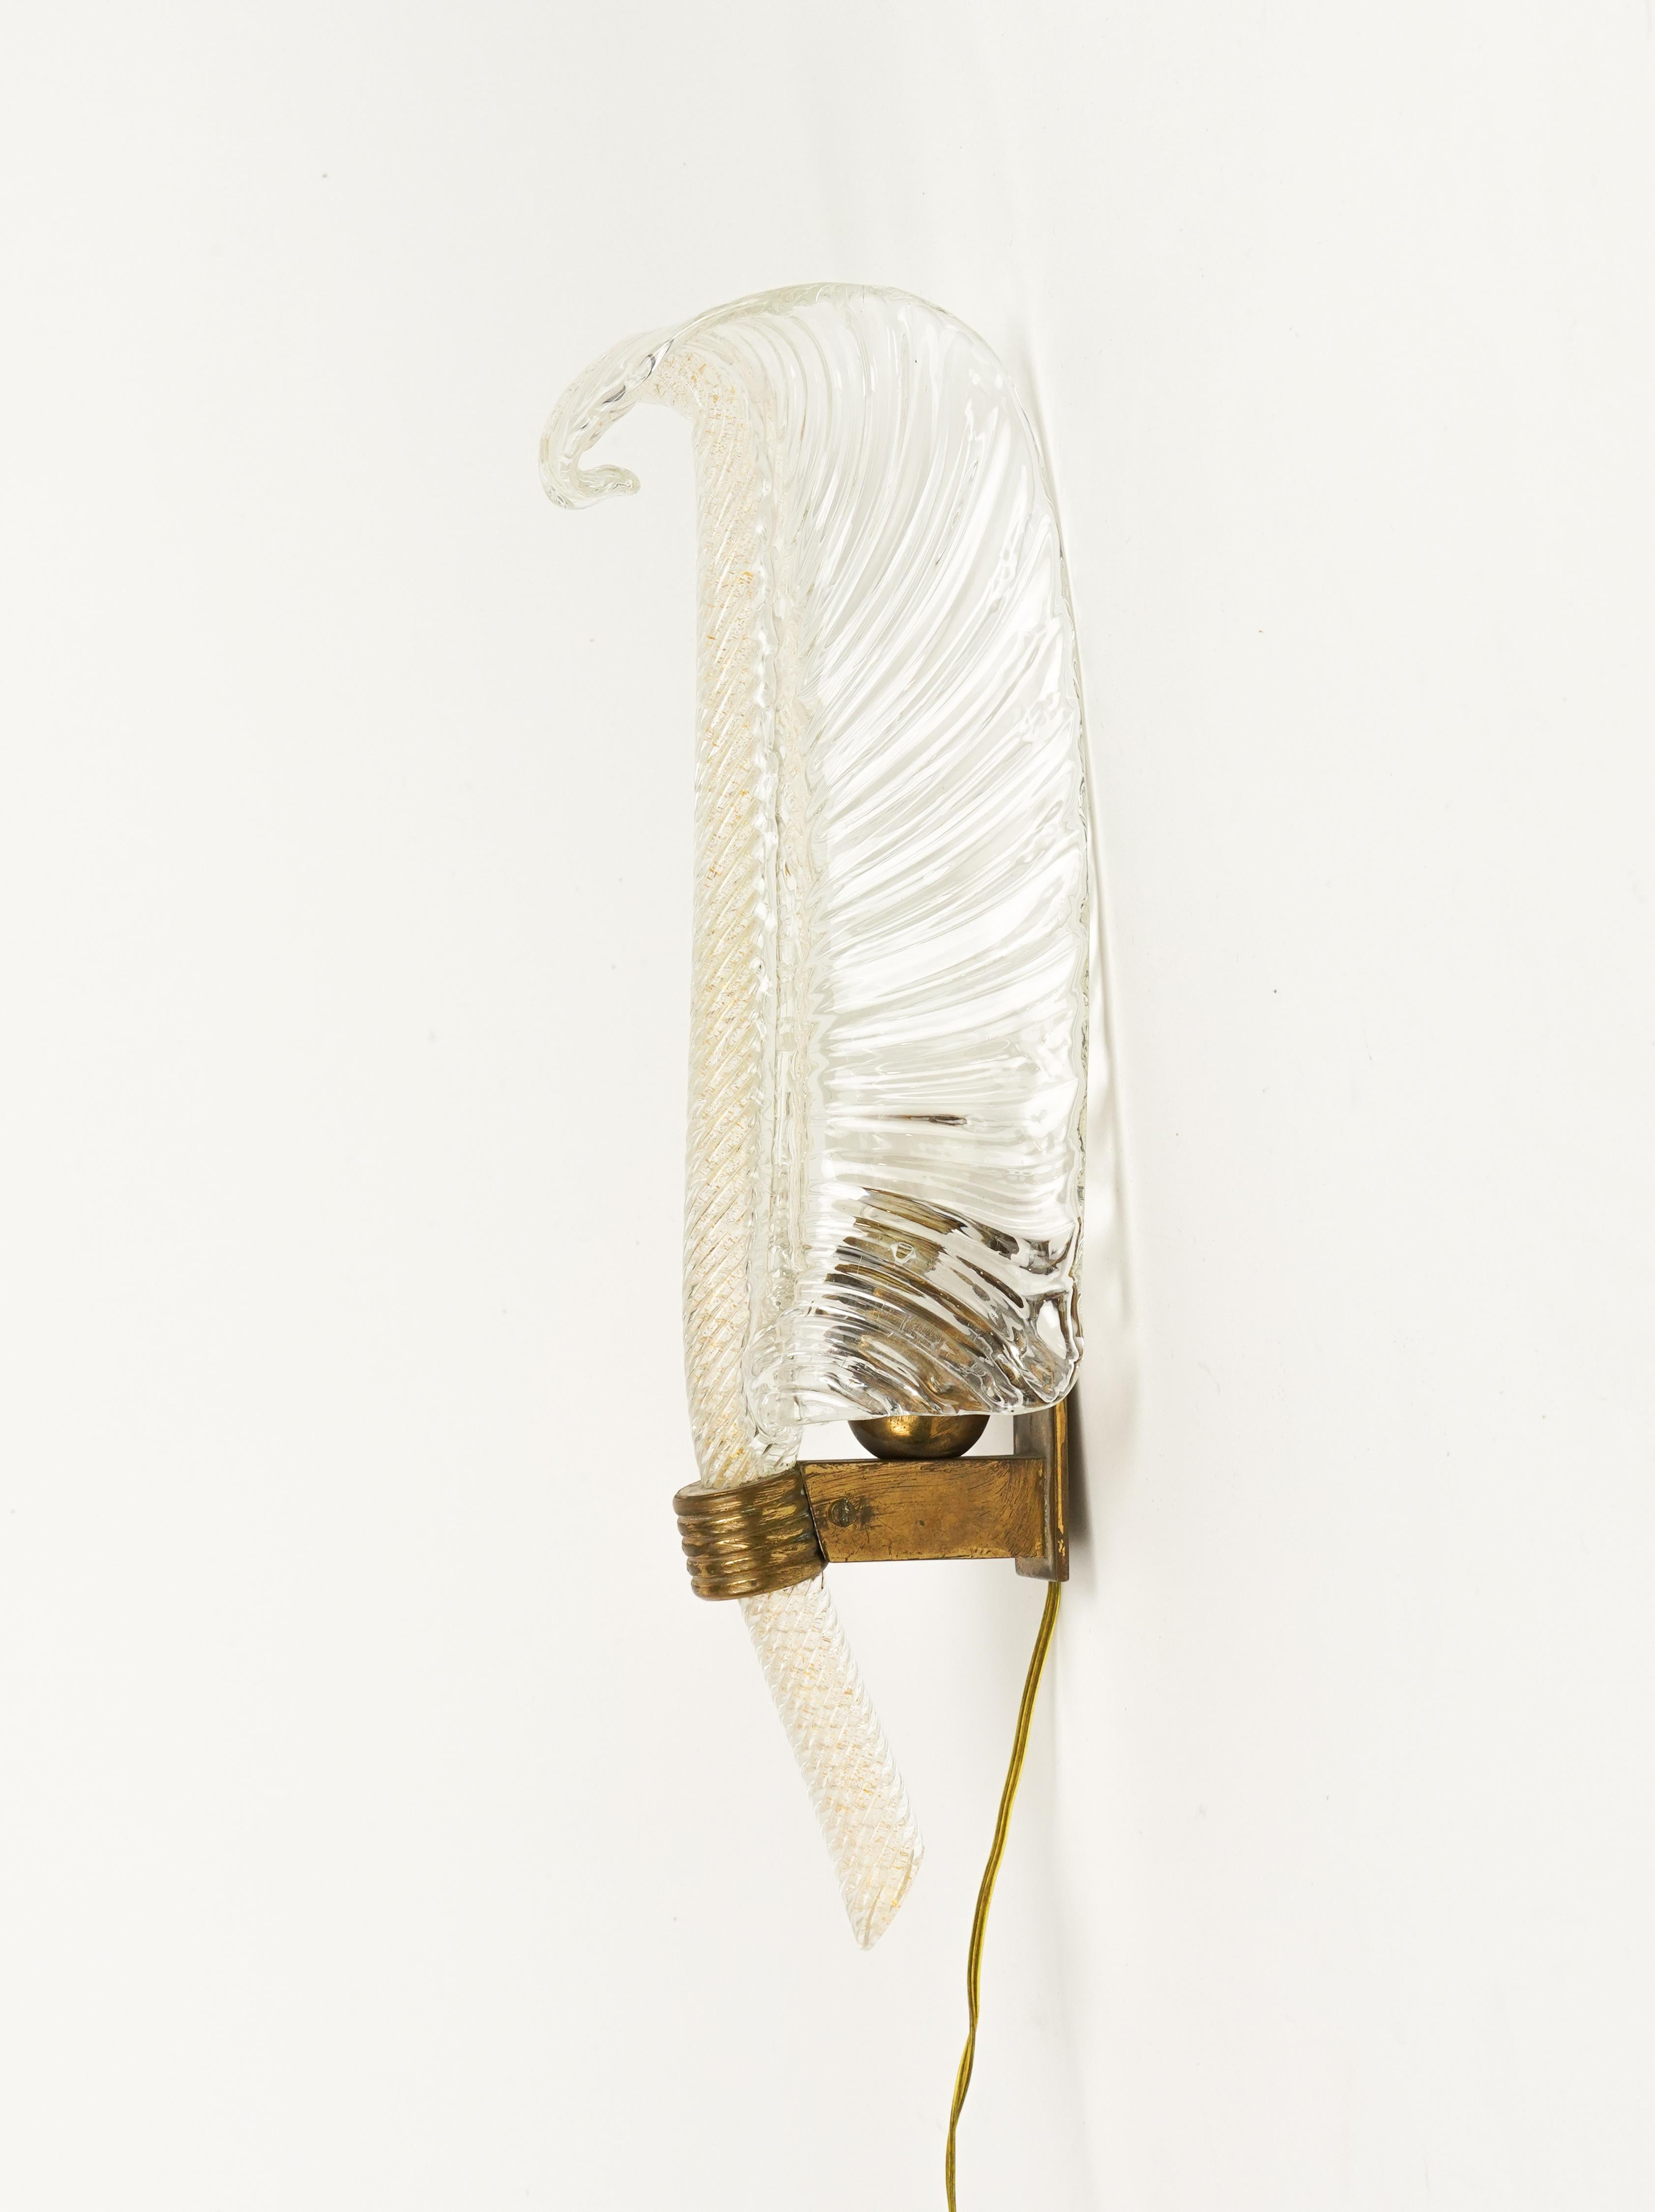 Italian Wall Lamp Sconce in Murano Glass and Brass by Barovier & Toso, Italy 1940s For Sale